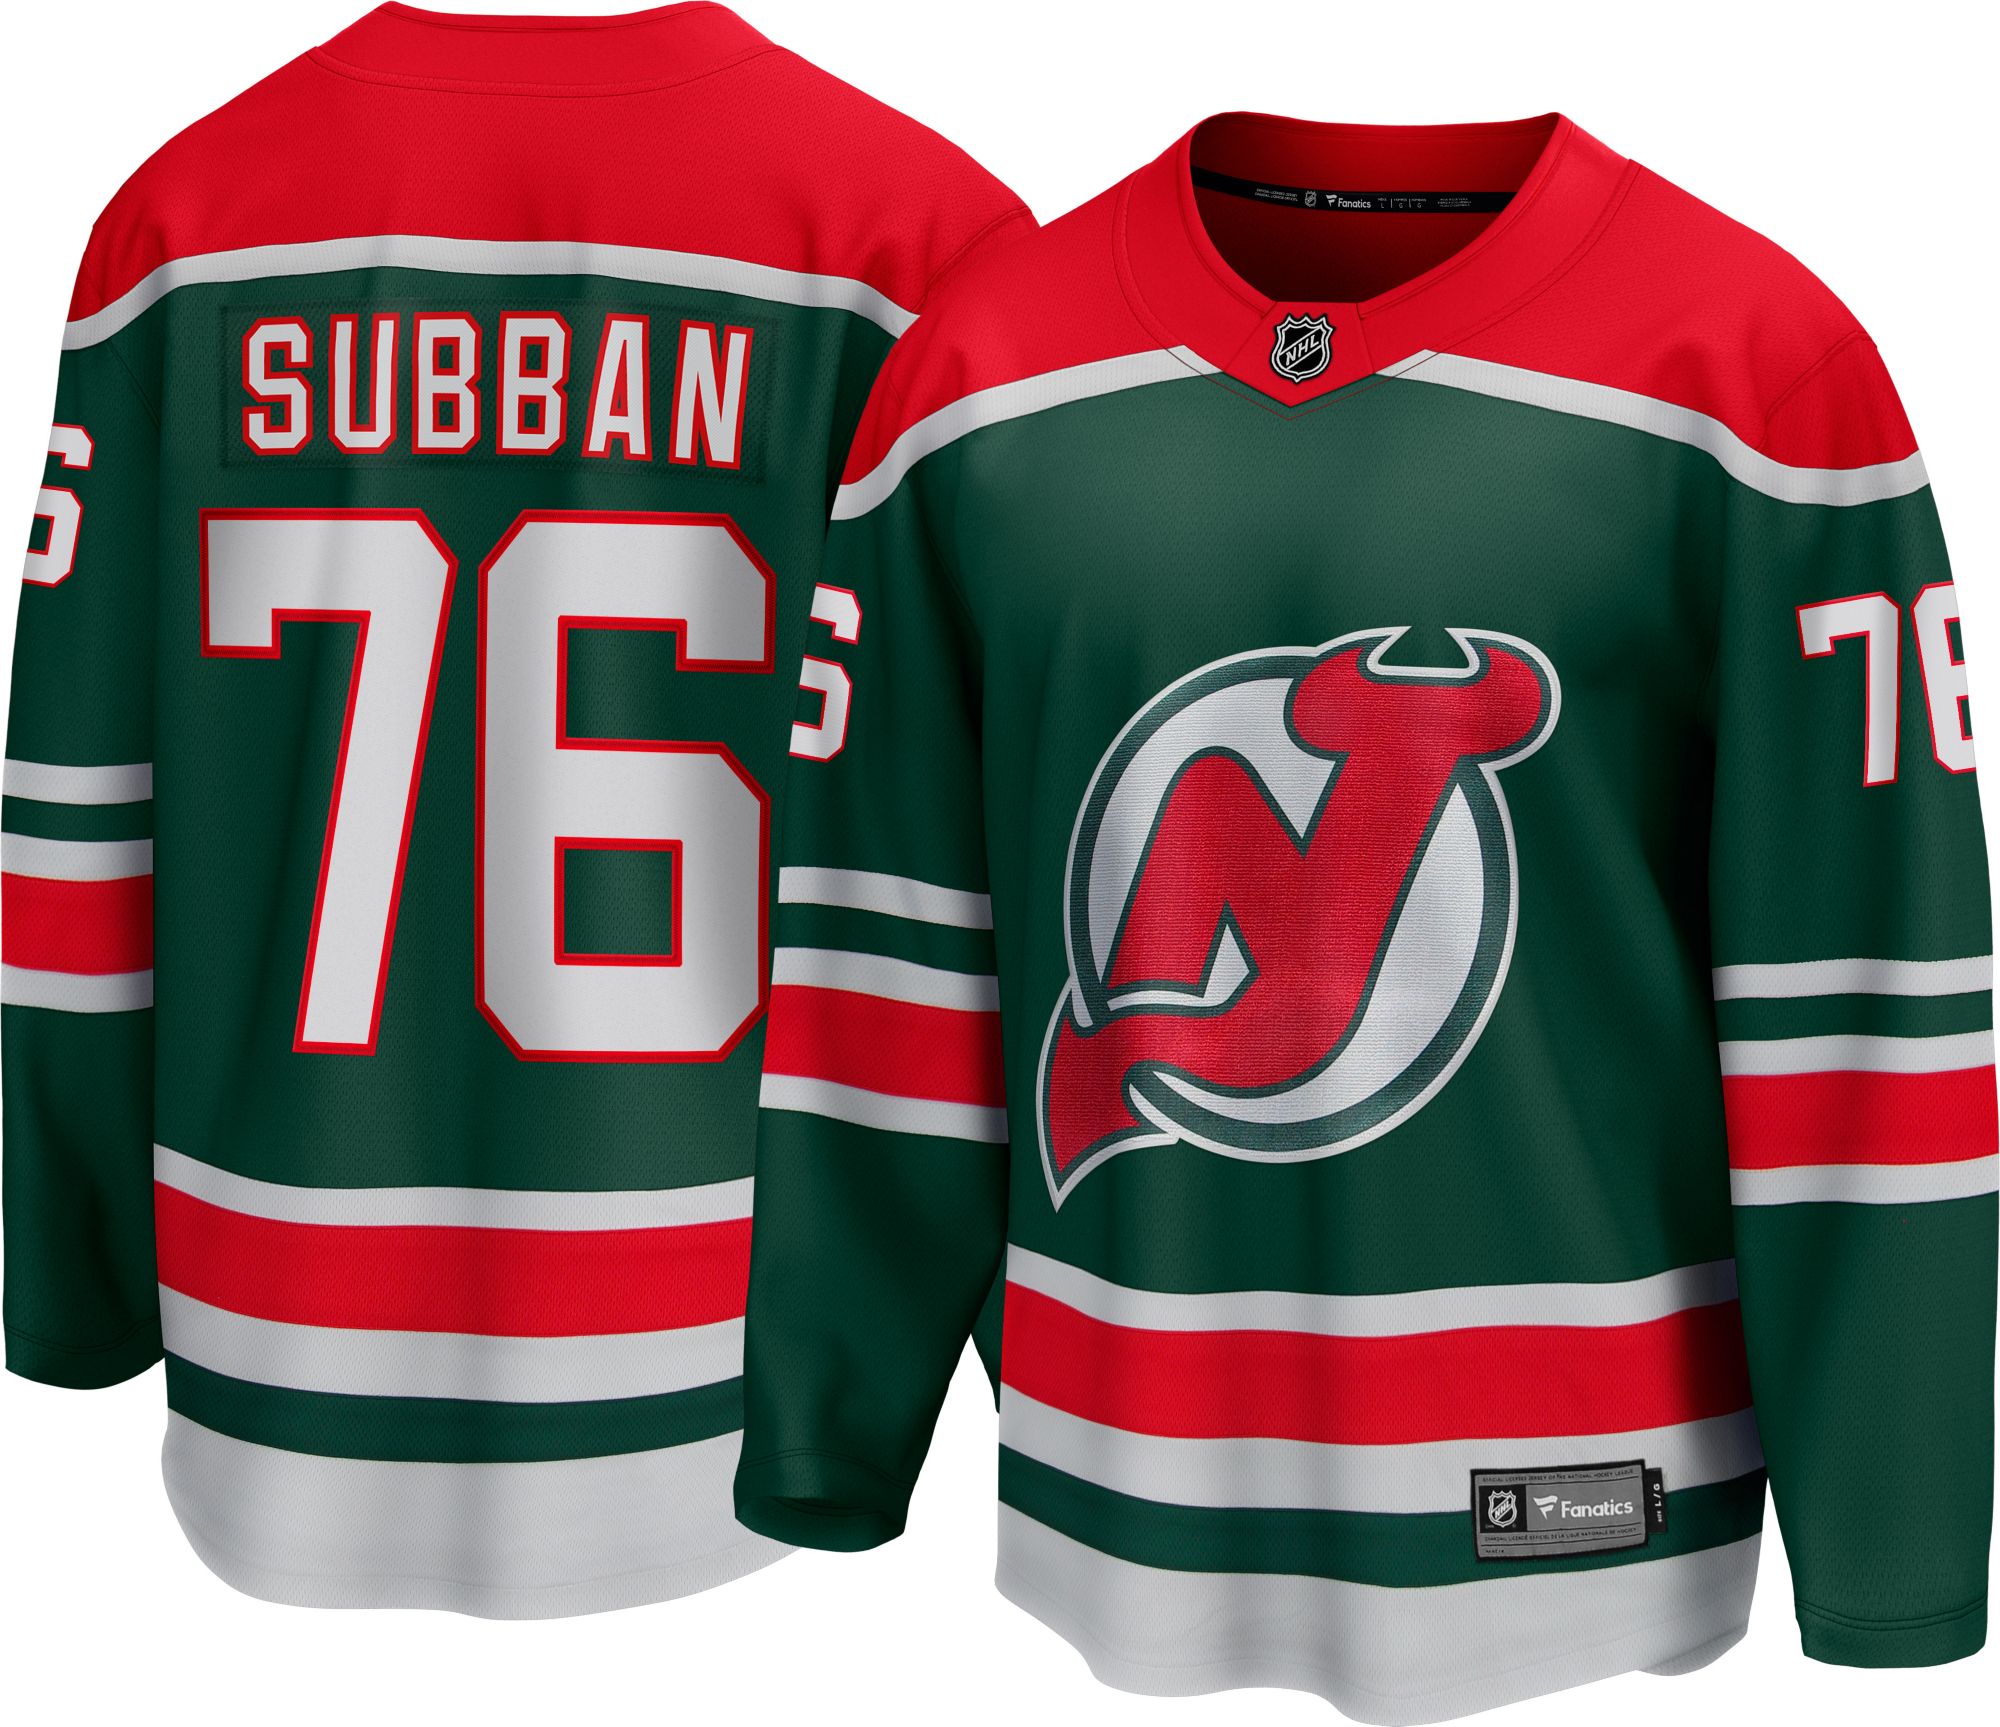 green and red jersey